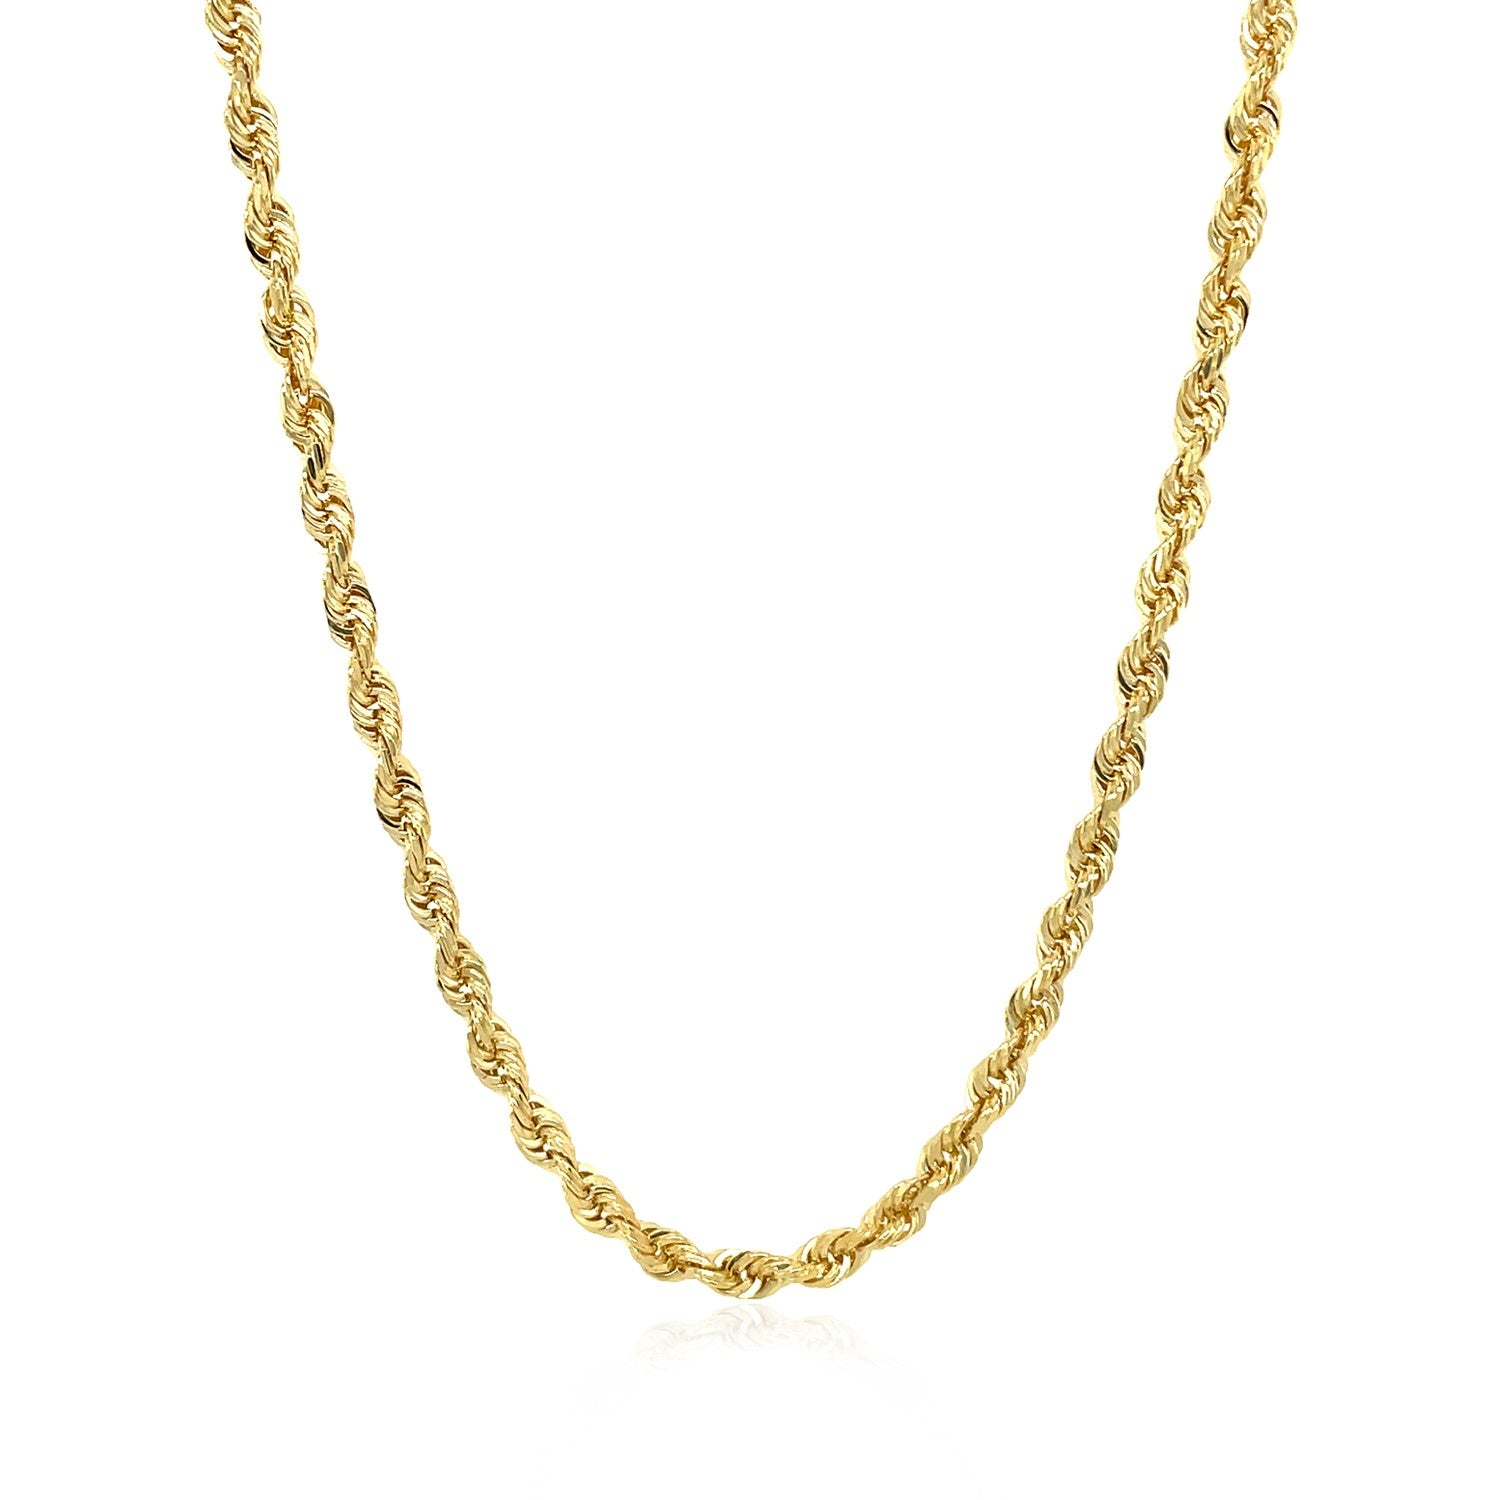 3 0Mm 14K Yellow Gold Solid Diamond Cut Rope Chain 58975-3